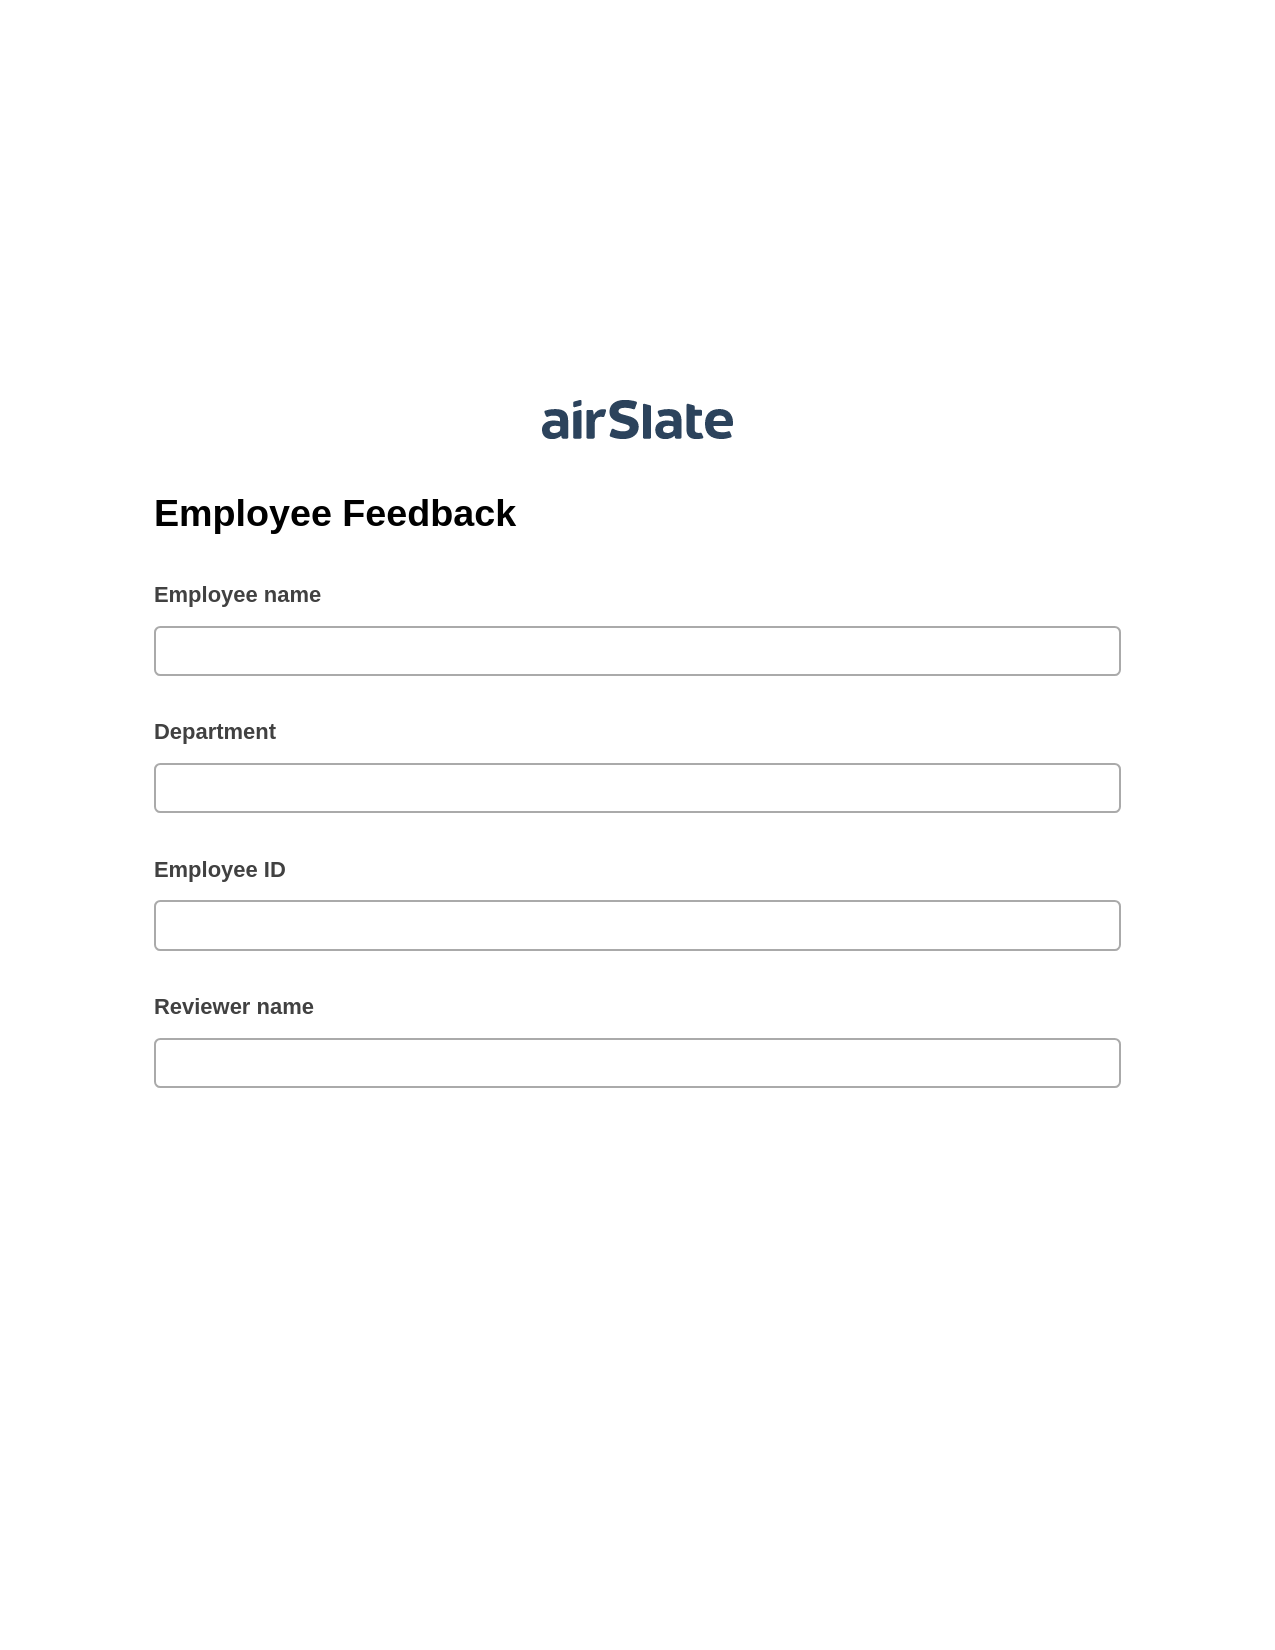 Employee Feedback Pre-fill from Google Sheet Dropdown Options Bot, Document Hide Bot, Post-finish Document Bot